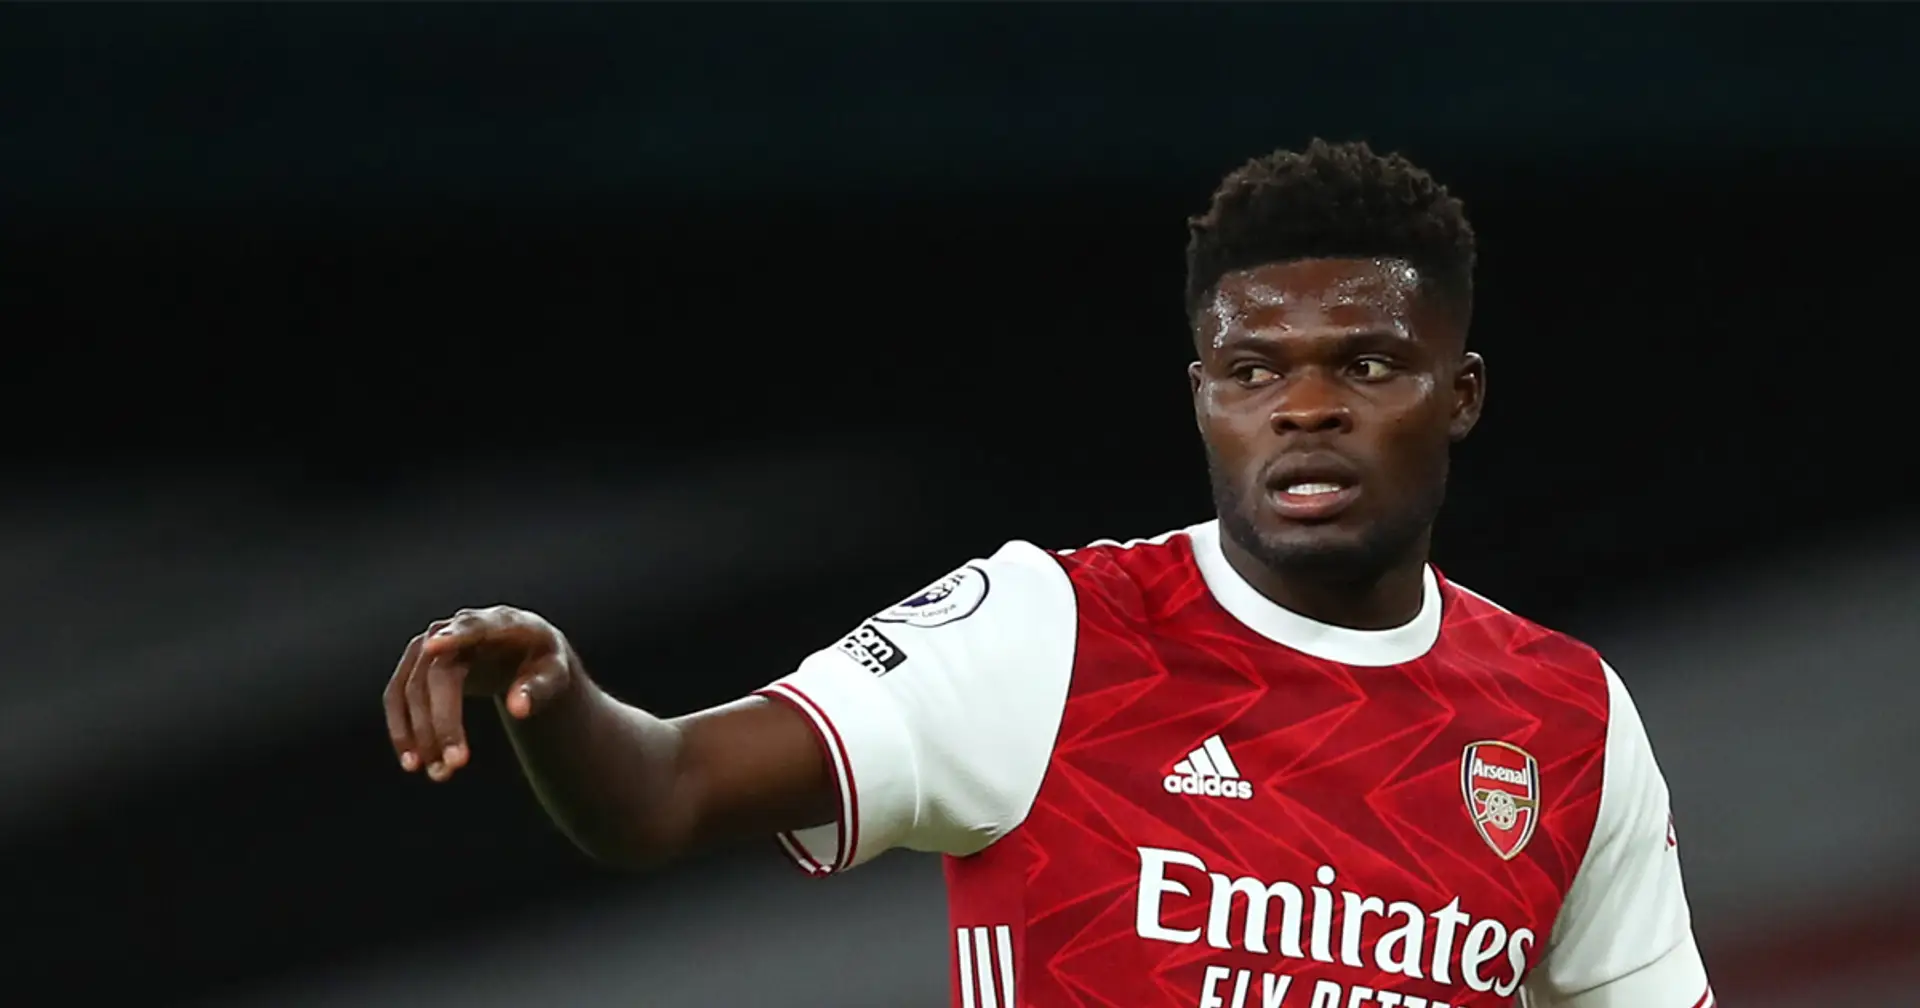 'Marked himself out of the game', 'He will learn': Arsenal global fan community analyses Partey's first EPL start